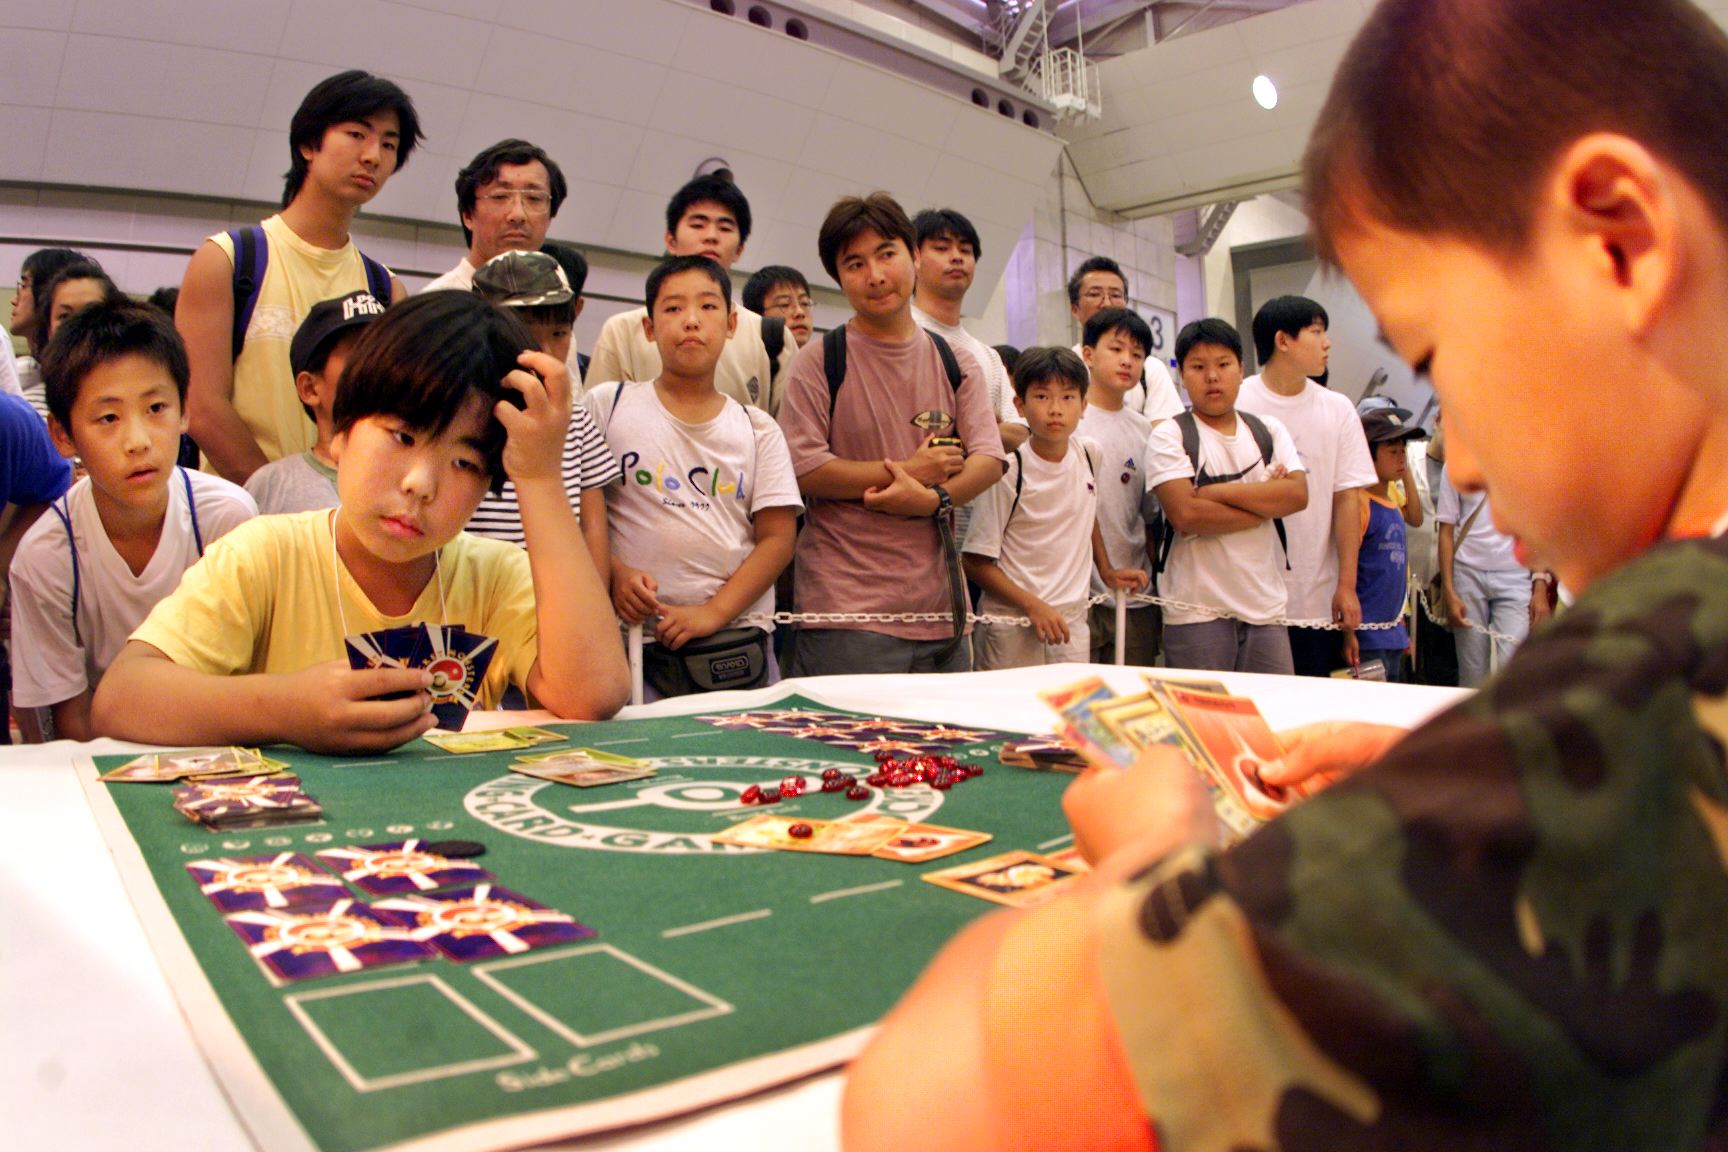 A crowd watches as Japanese boys play a close game in Tokyo 04 August 1999 as they participate in a Pokemon (Pocket Monster) card game tournament. (Yoshikazu Tsuno—AFP/Getty Images)